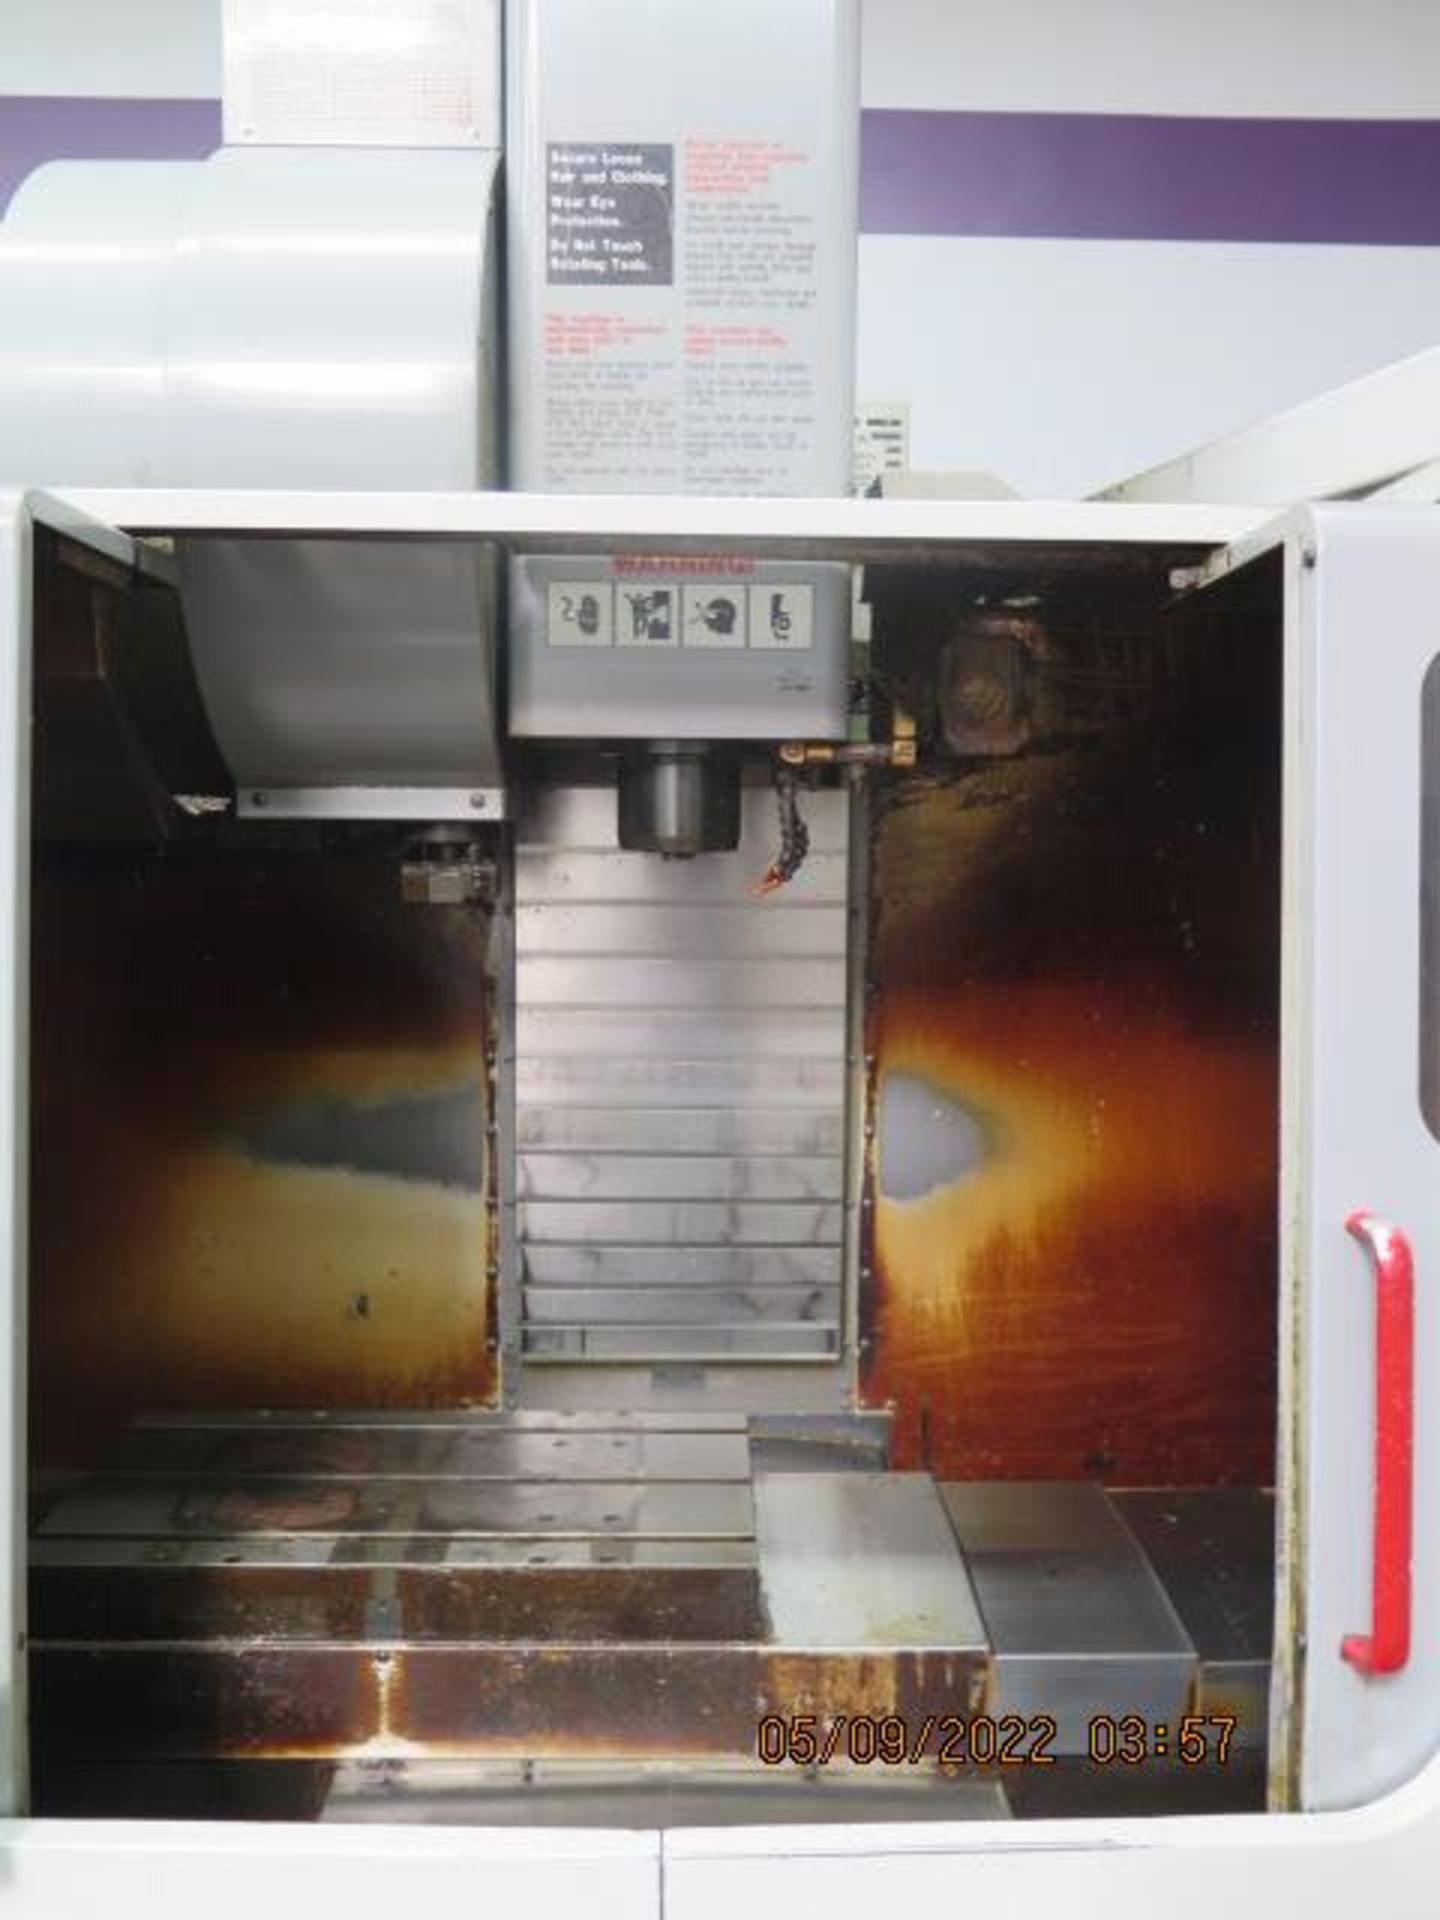 2005 Haas VF-1D CNC VMC s/n 41409 w/ Haas Controls, Hand Wheel, 24-Station ATC, SOLD AS IS - Image 4 of 16